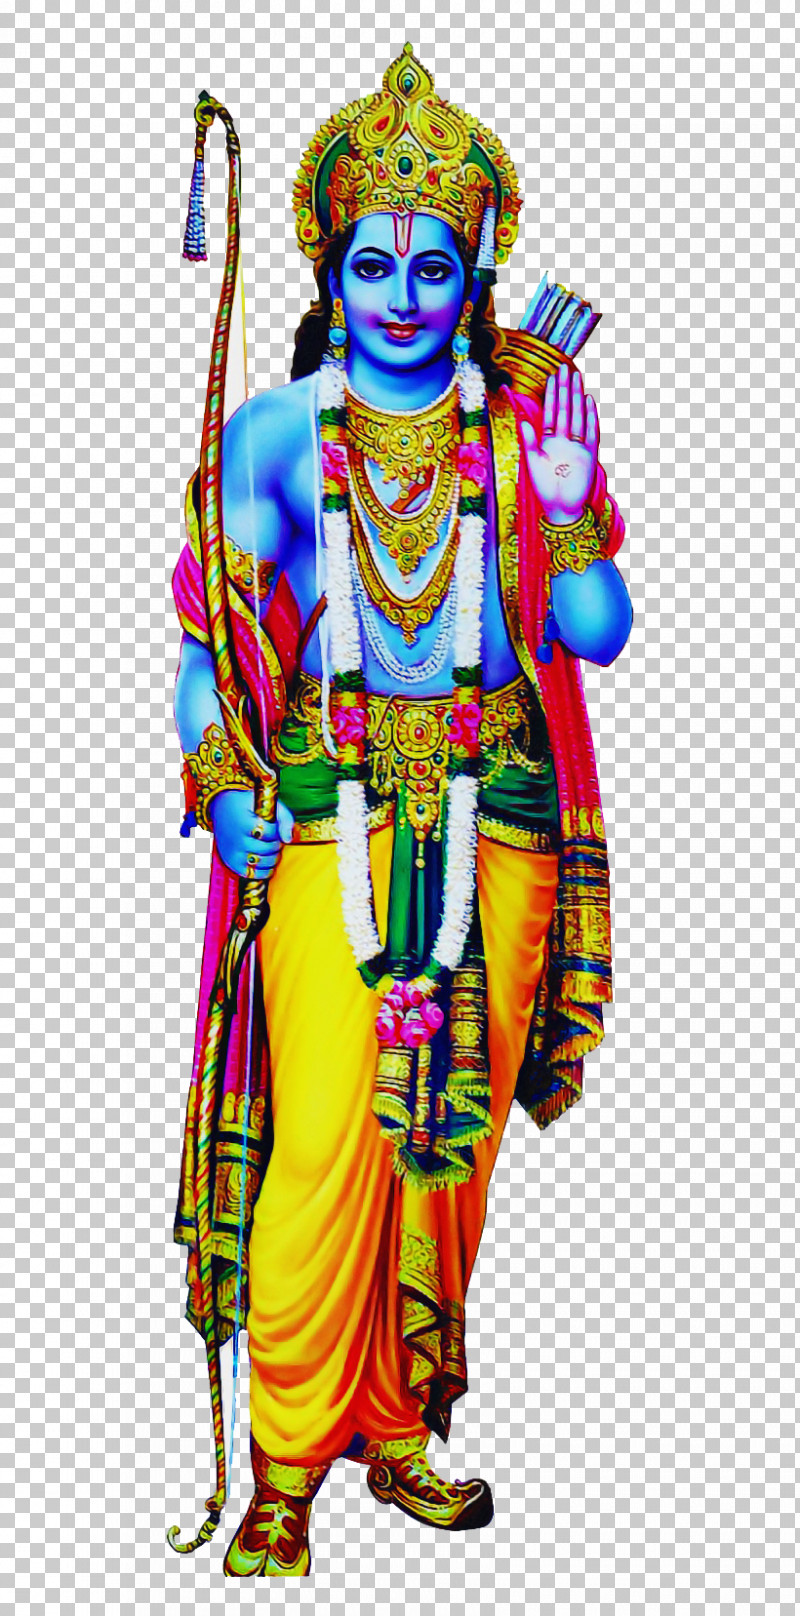 Temple Statue PNG, Clipart, Statue, Temple Free PNG Download